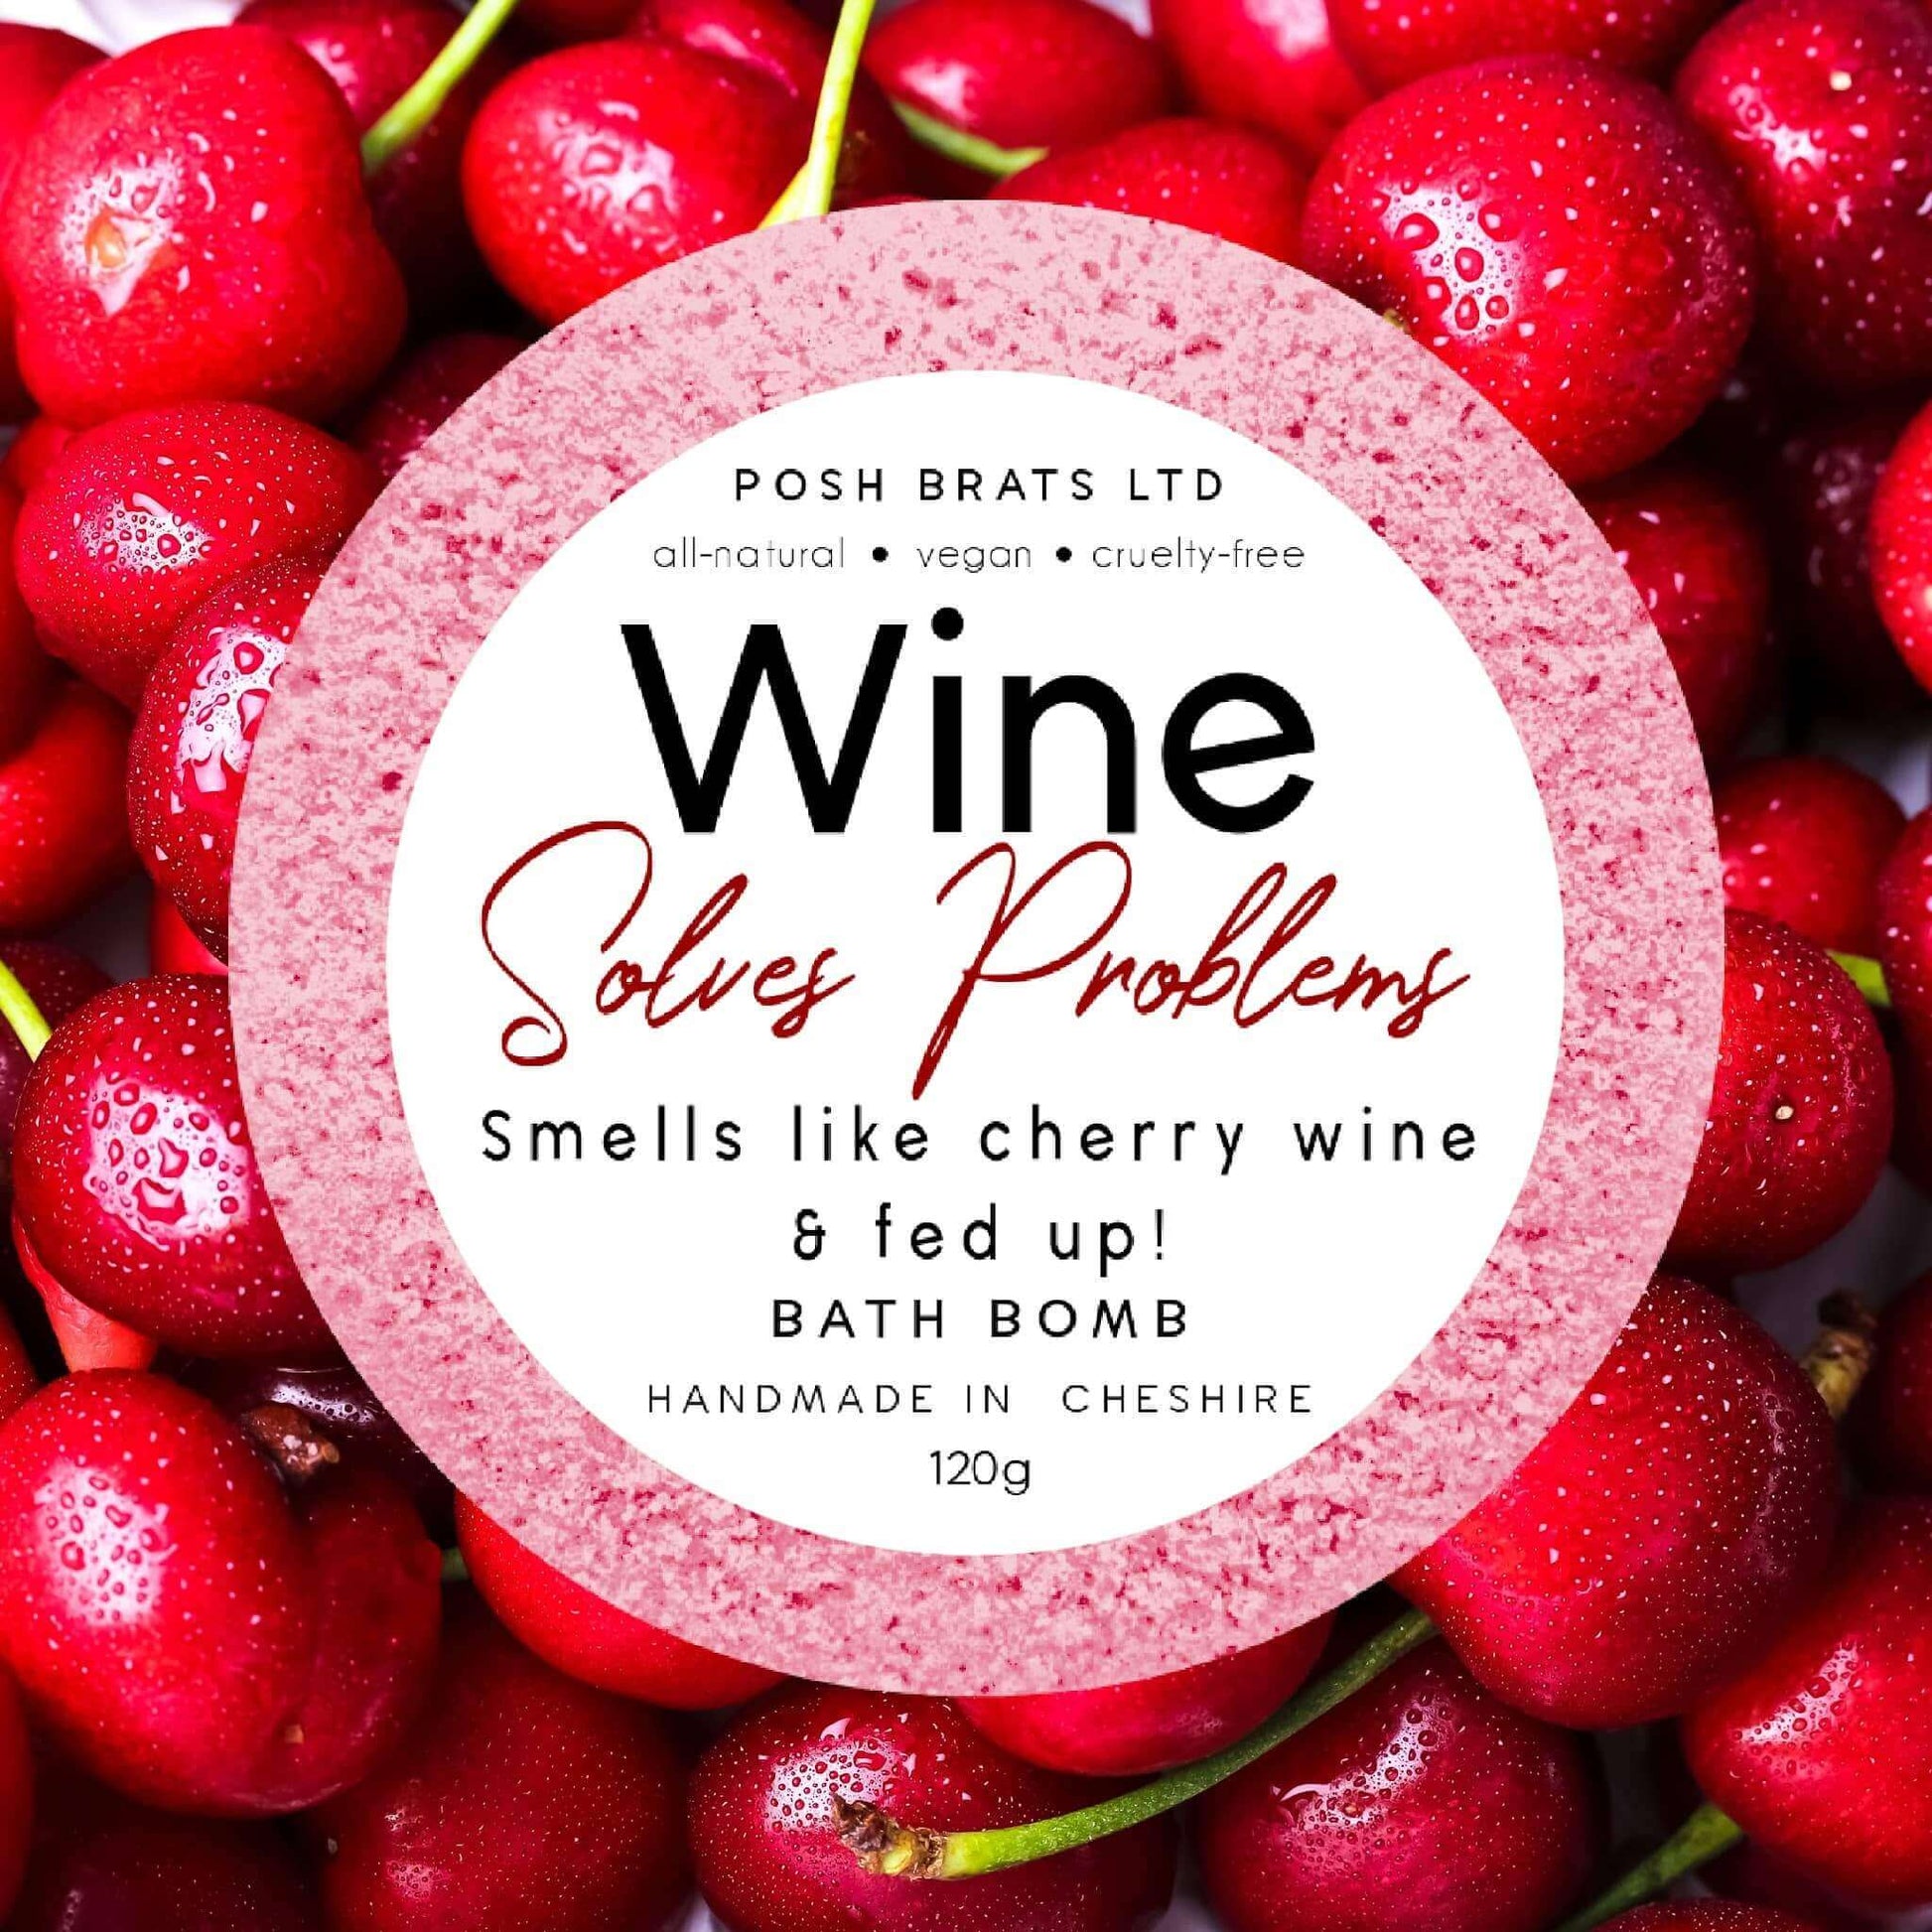 Indulge in the luxury of a relaxing bath with our Wine Solves Problems Fizzy Bath Bomb - your new favorite way to wine down!